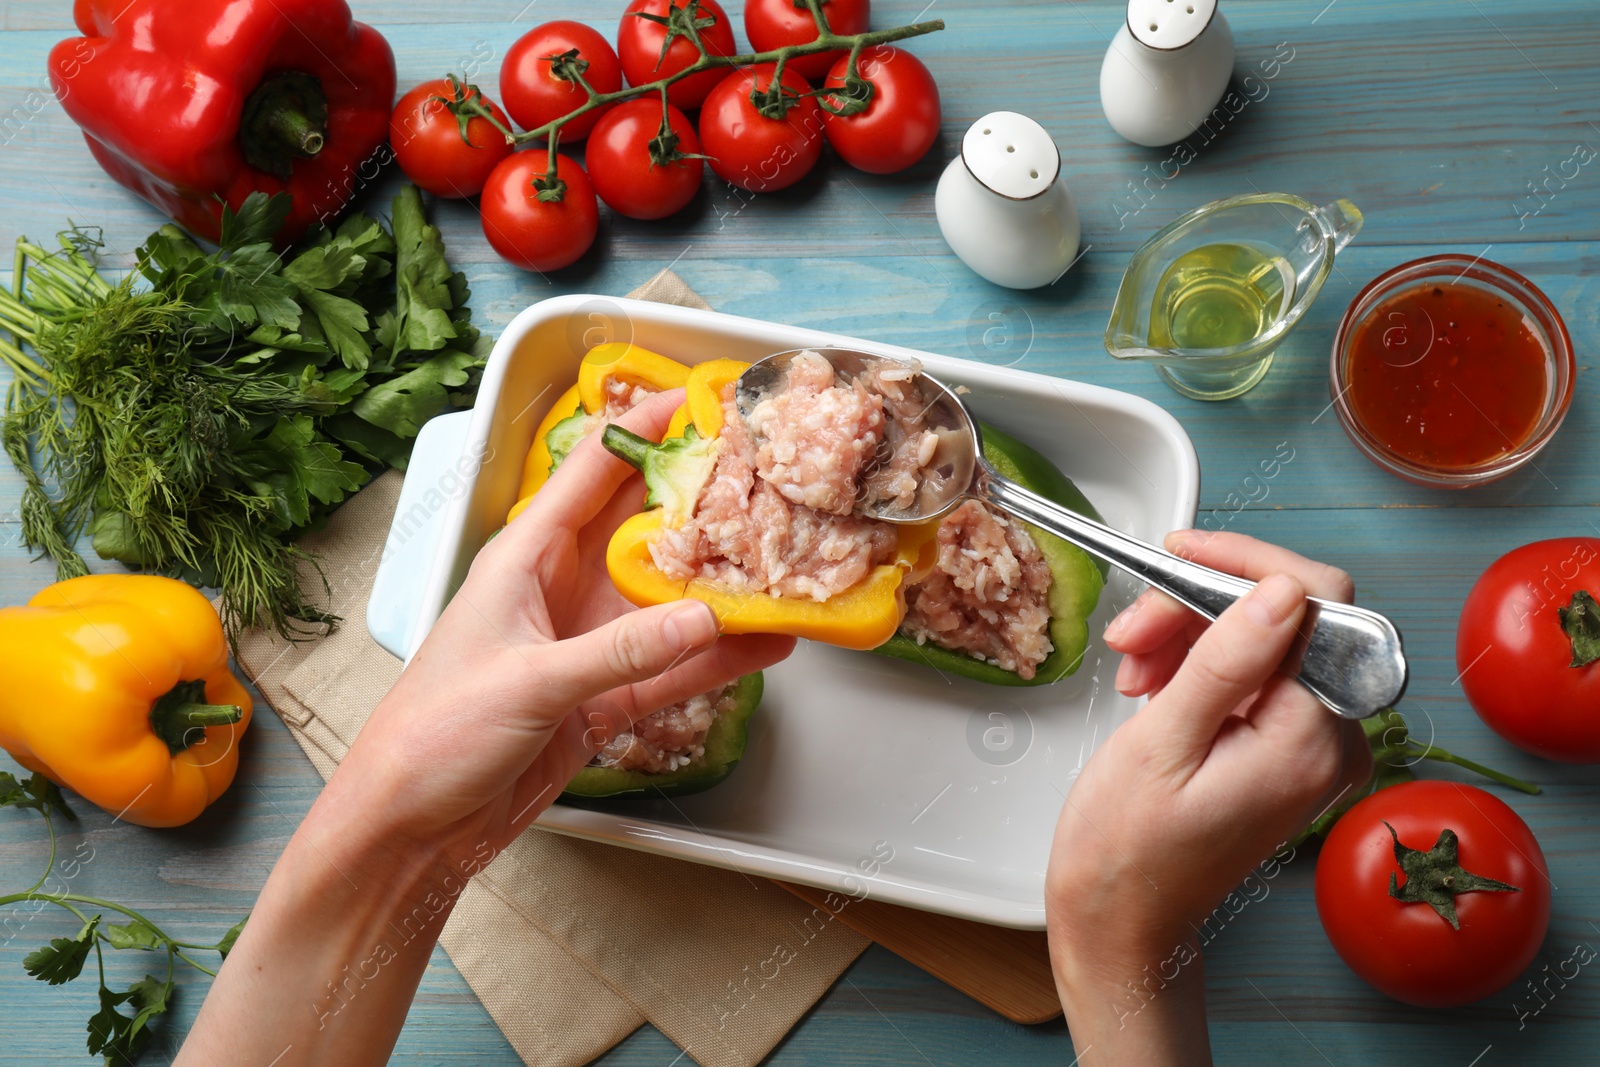 Photo of Woman making stuffed peppers with ground meat at light blue wooden table, top view